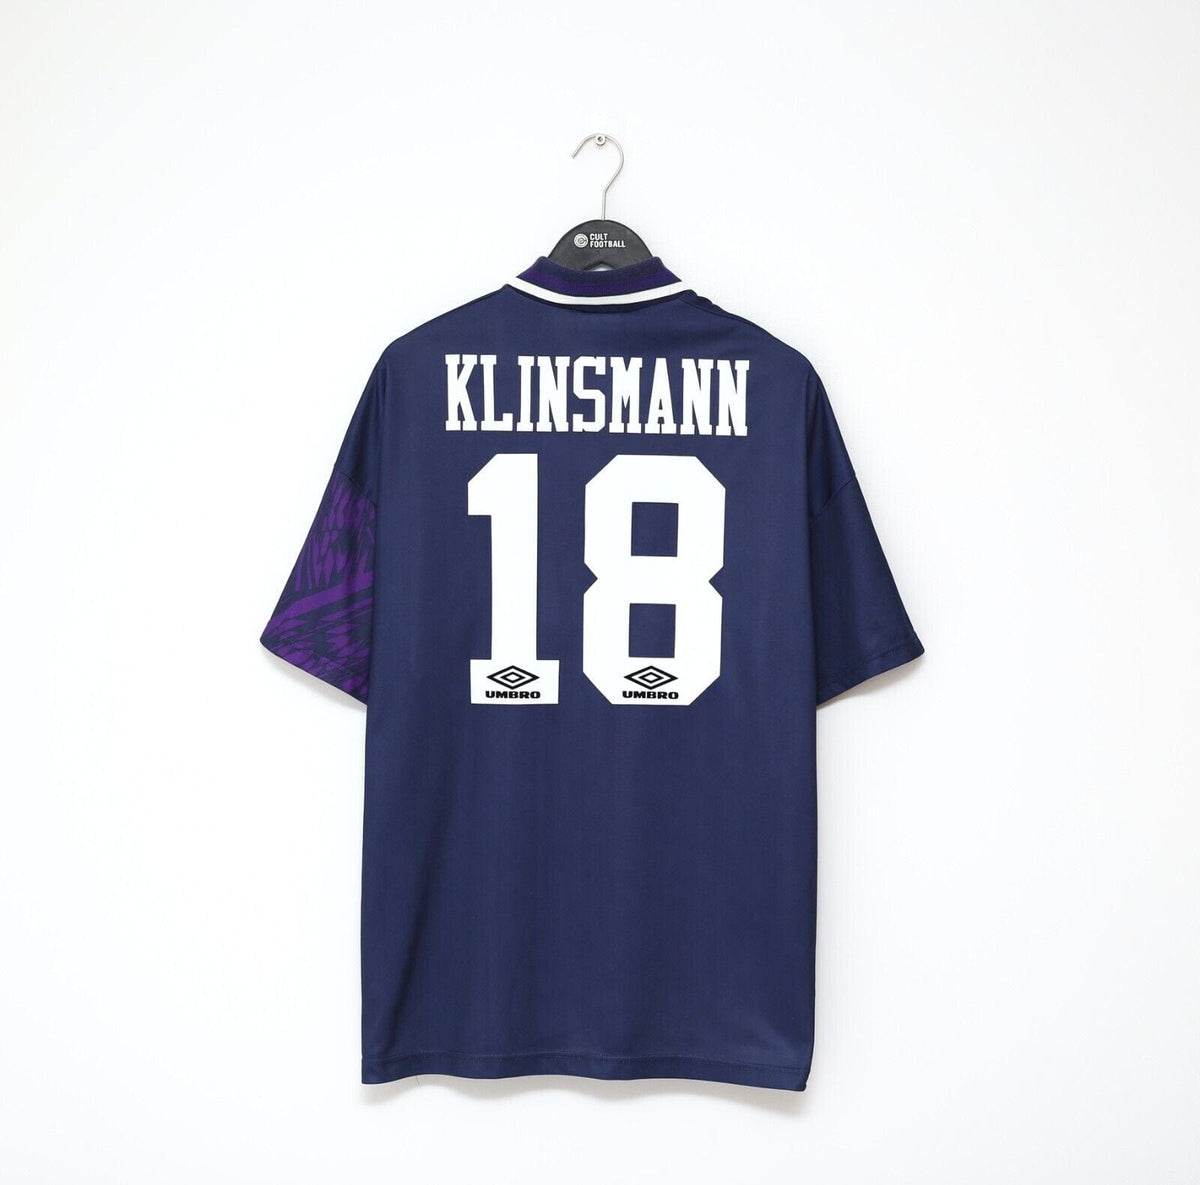 All Tagged tottenham - Football Shirt Collective